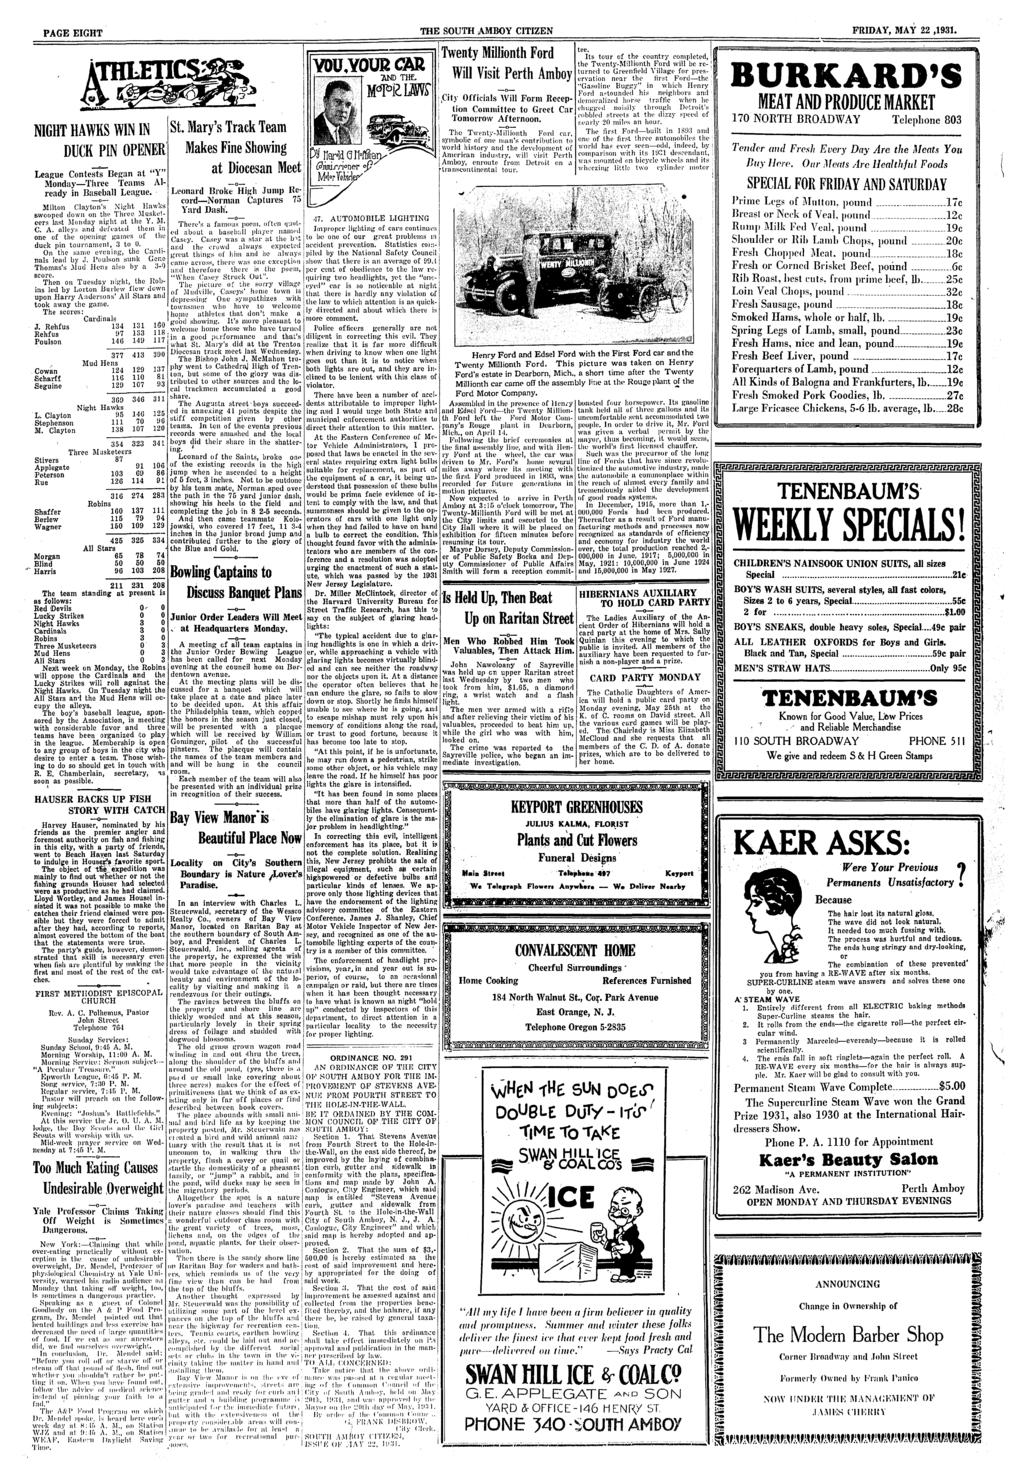 PAGE EIGHT THE SOUTH AMBOY CITIZEN FRIDAY, MAY 22,1931. NIGHT HAWKS WIN IN DUCK PIN OPENER League ContestsTBegan at "Y" Monday Three Teams Already n Baseball League.